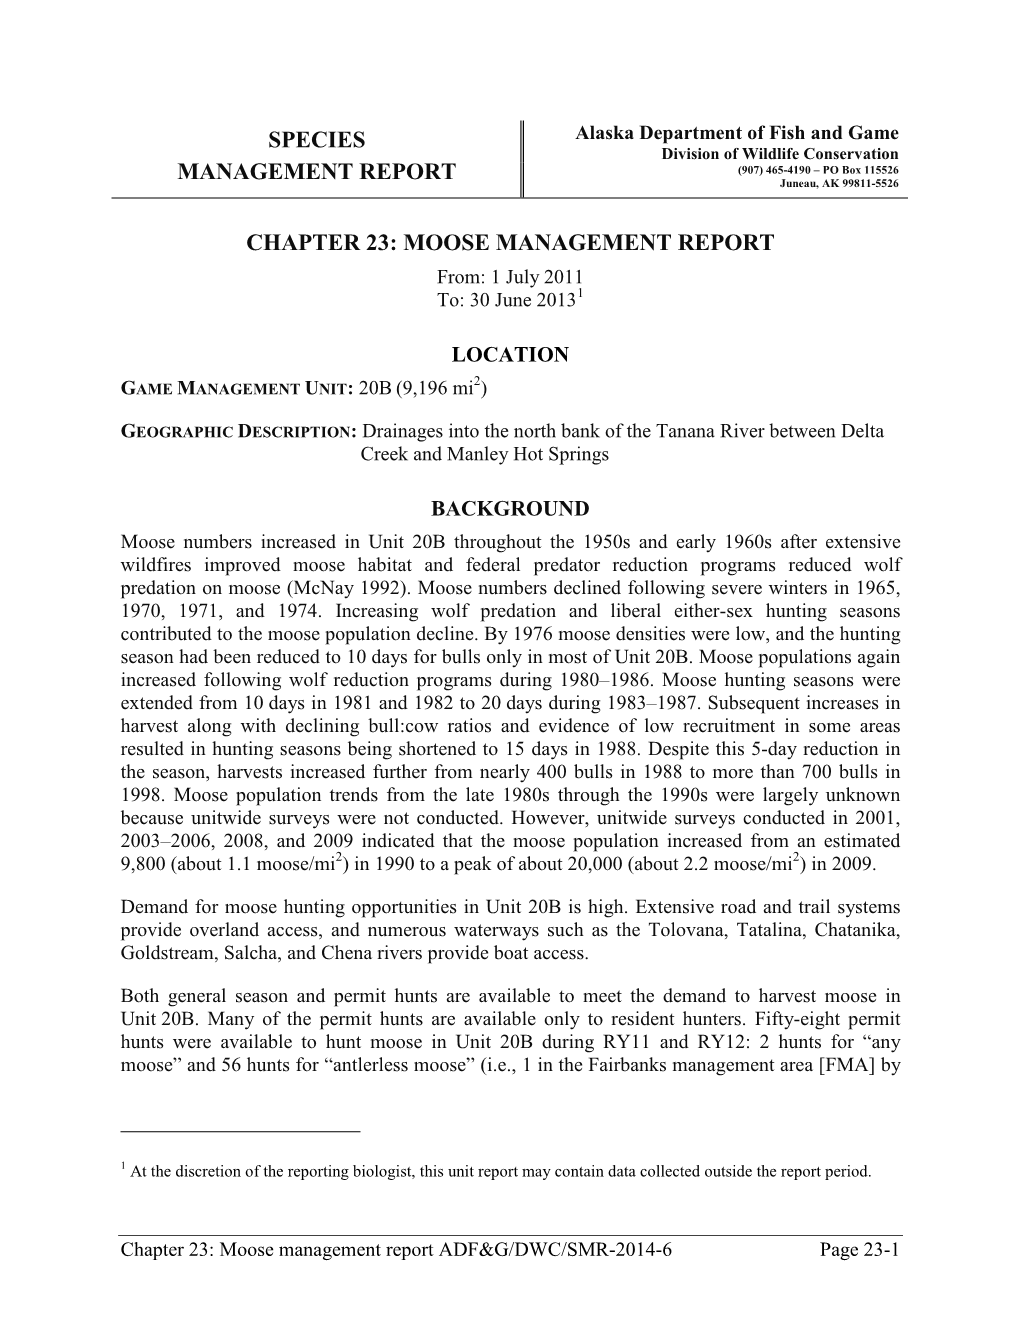 Unit 20B Moose. Chapter 23: Moose Management Report of Survey-Inventory Activities 1 July 2011-30 June 2013